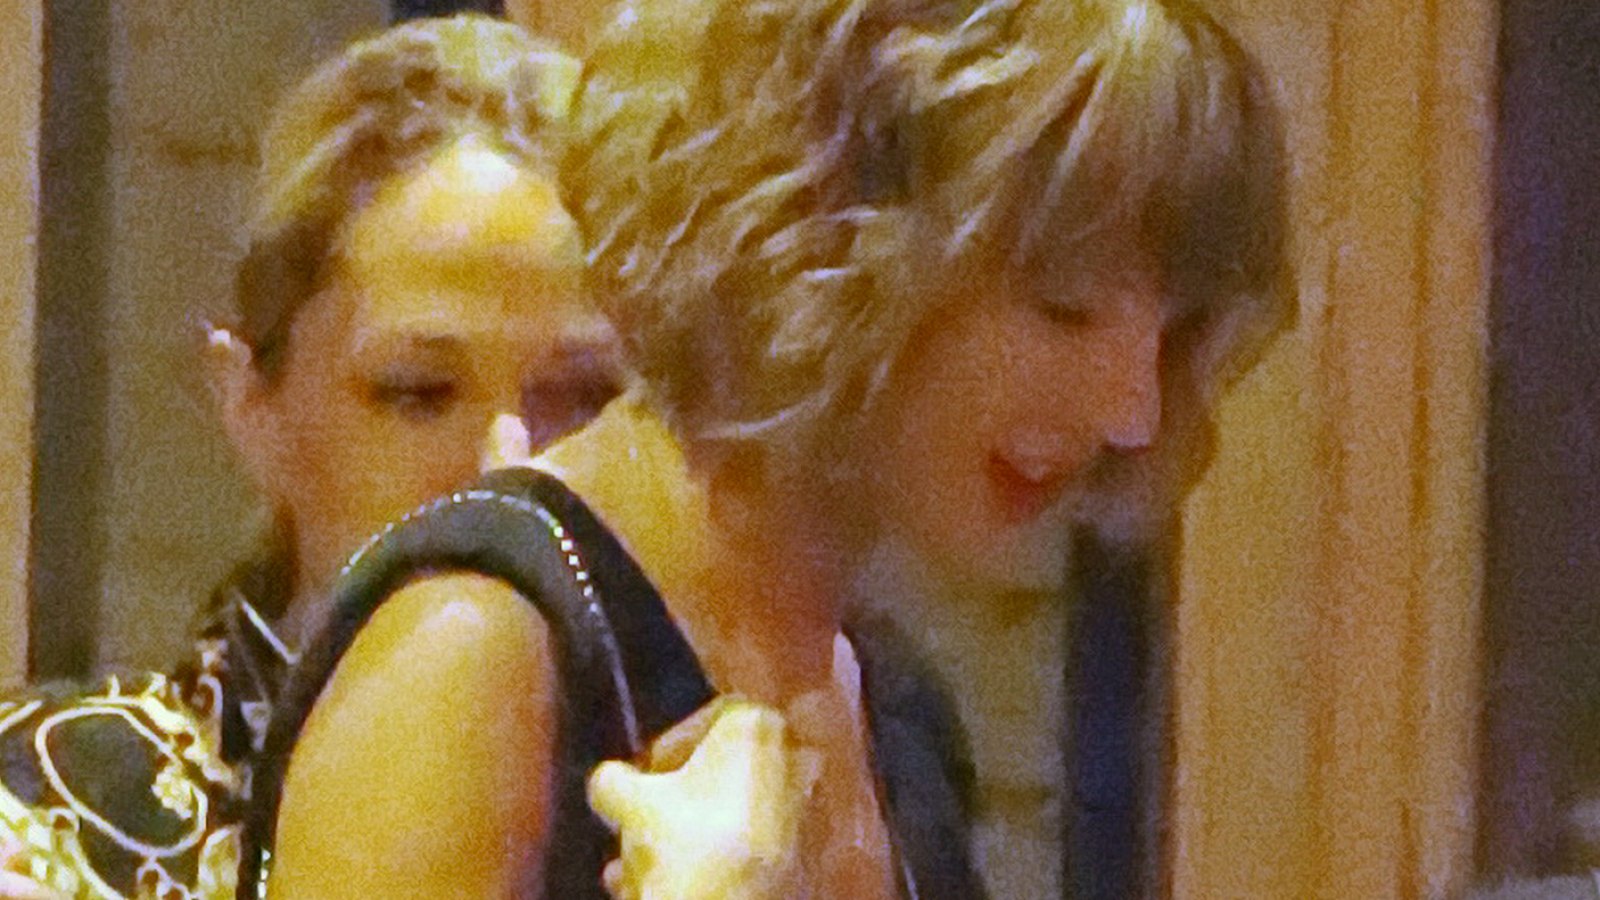 Taylor Swift wears a gold heart shaped locket necklace following her one year anniversary with boyfriend Calvin Harris.